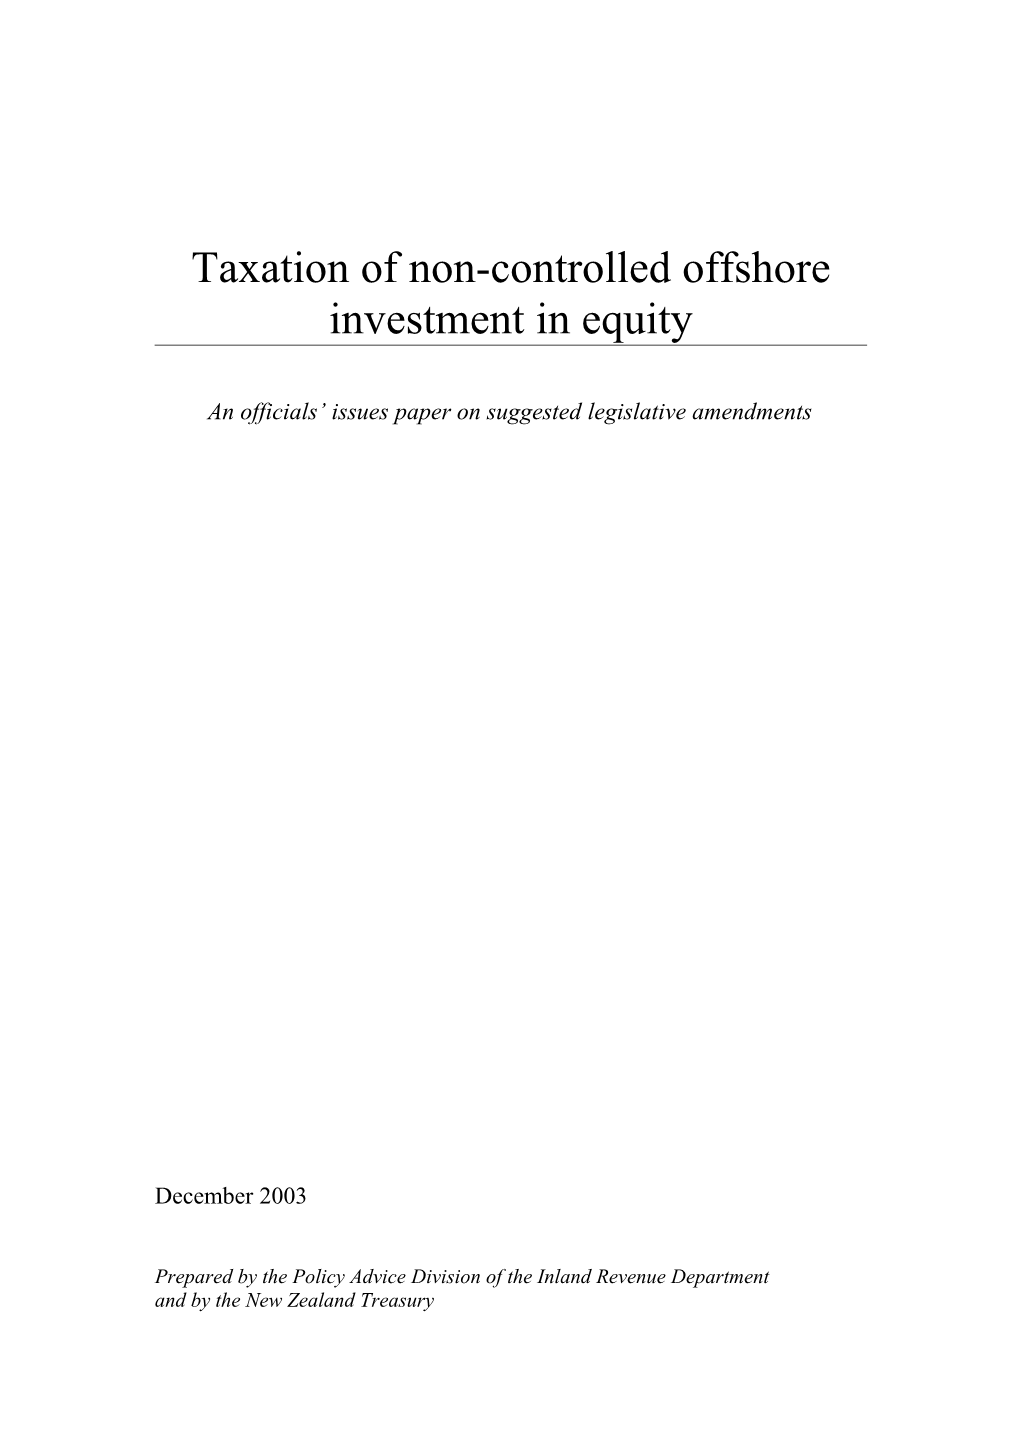 Taxation of Non-Controlled Offshore Investment in Equity